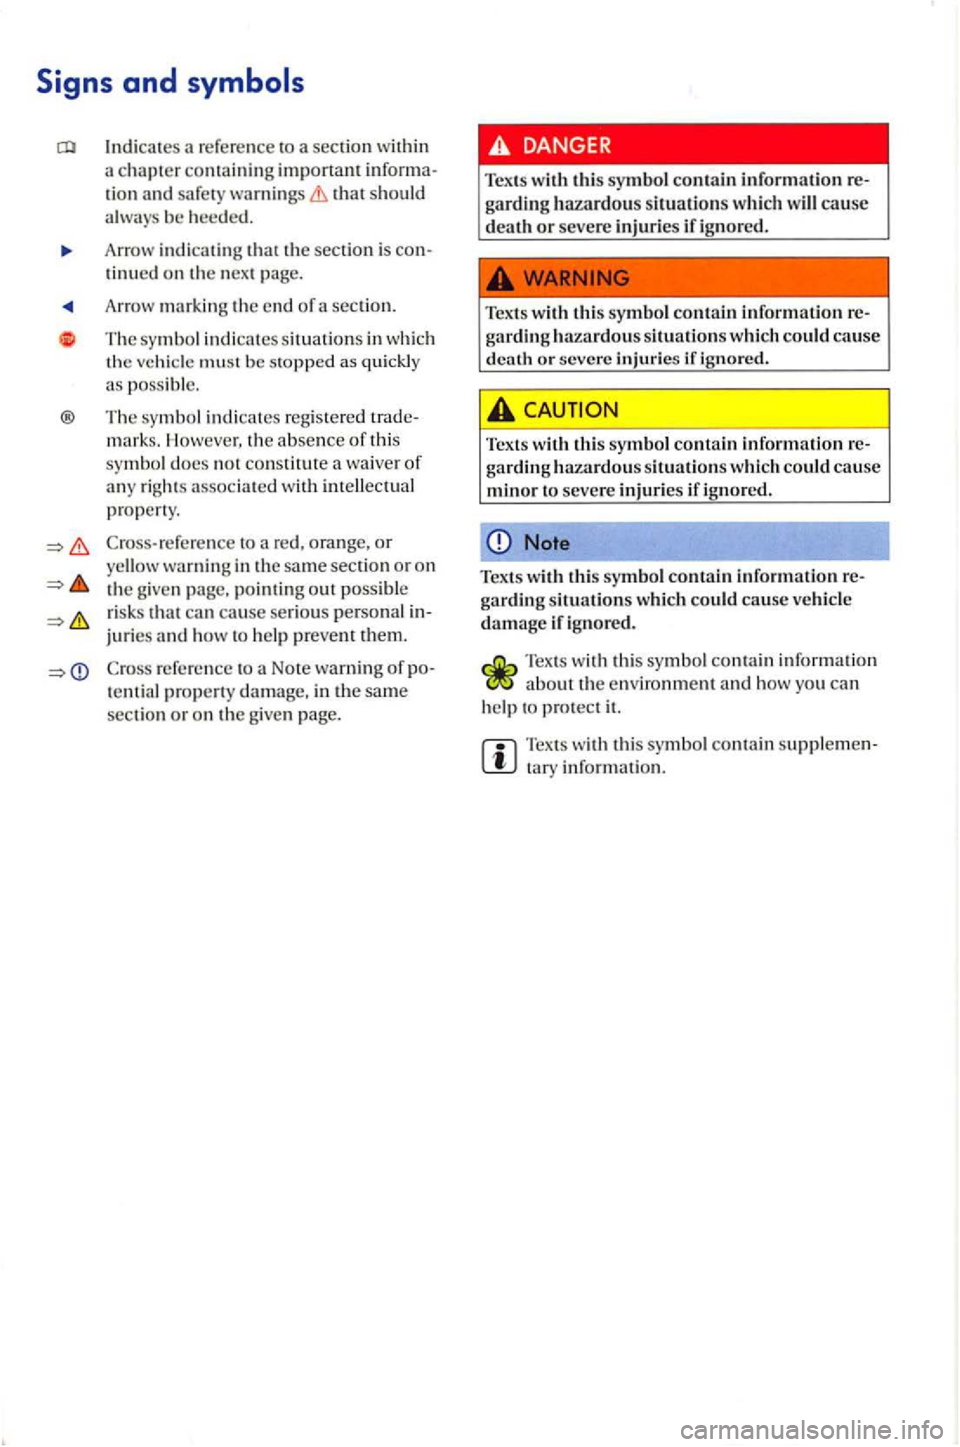 VOLKSWAGEN GOLF PLUS 2007  Owners Manual Indicates a  re fe rence  to  a section within a chapter c ontaining important tion and safe ty warnings that should a lways be heeded. 
Arrow  indicating that the section is tinued on th e nex t page